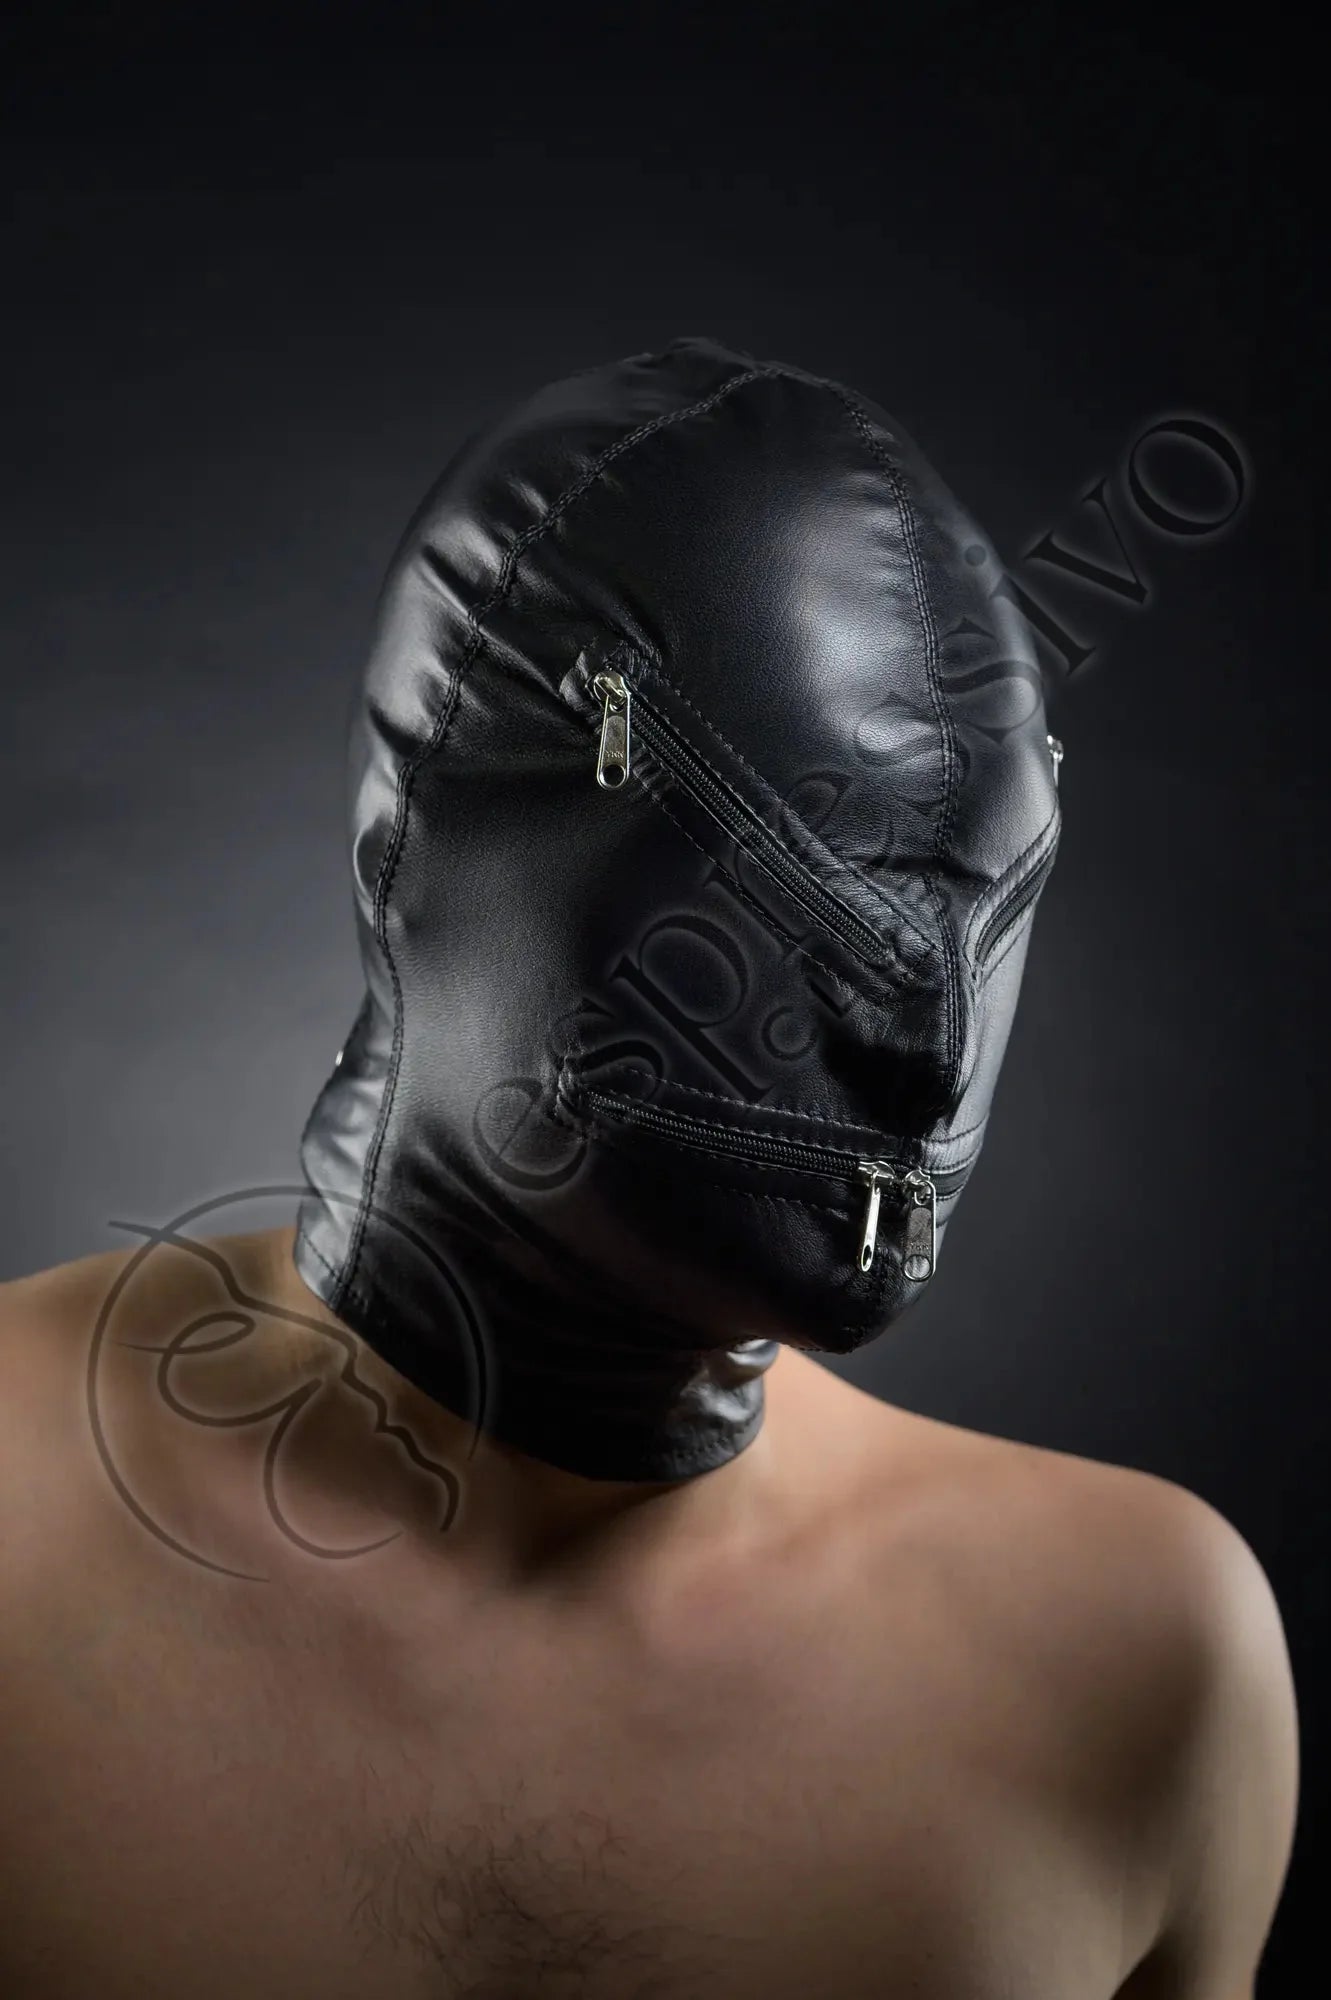 Real Leather Tight Bondage Zippers Hood for BDSM Sensory Deprivation